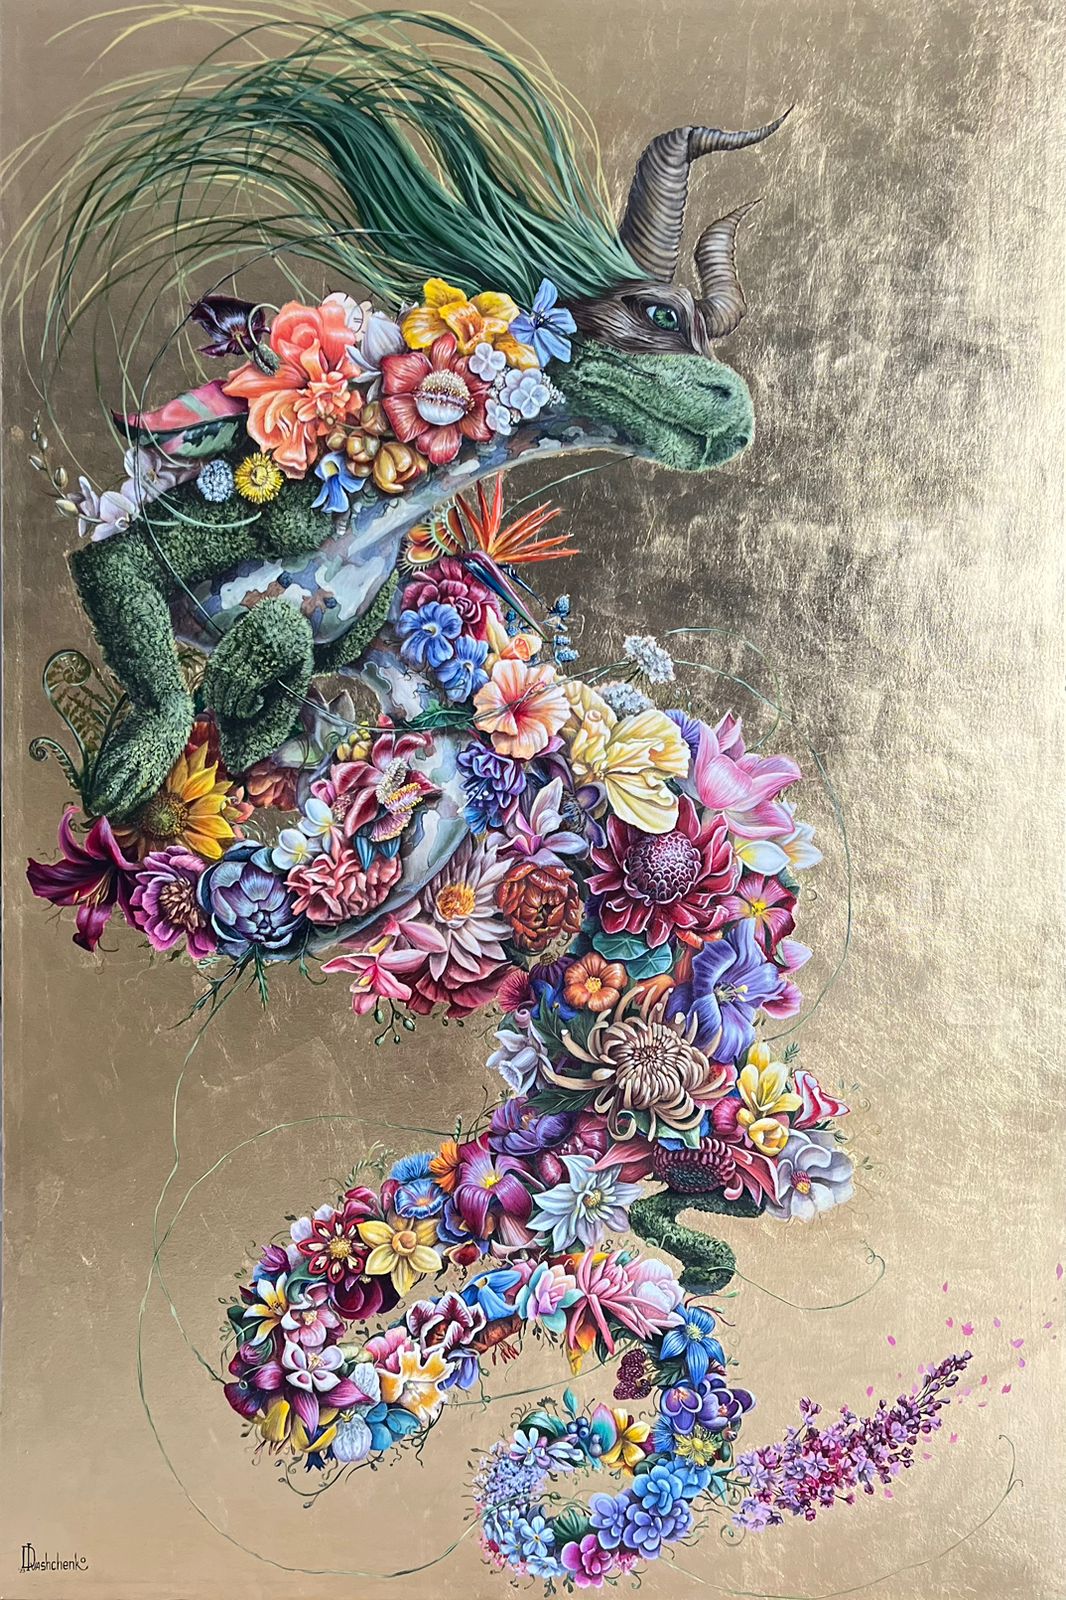 dragon, creature, Bloom of fortune, Oil and metal on canvas, painting, Daria Ivashchenko